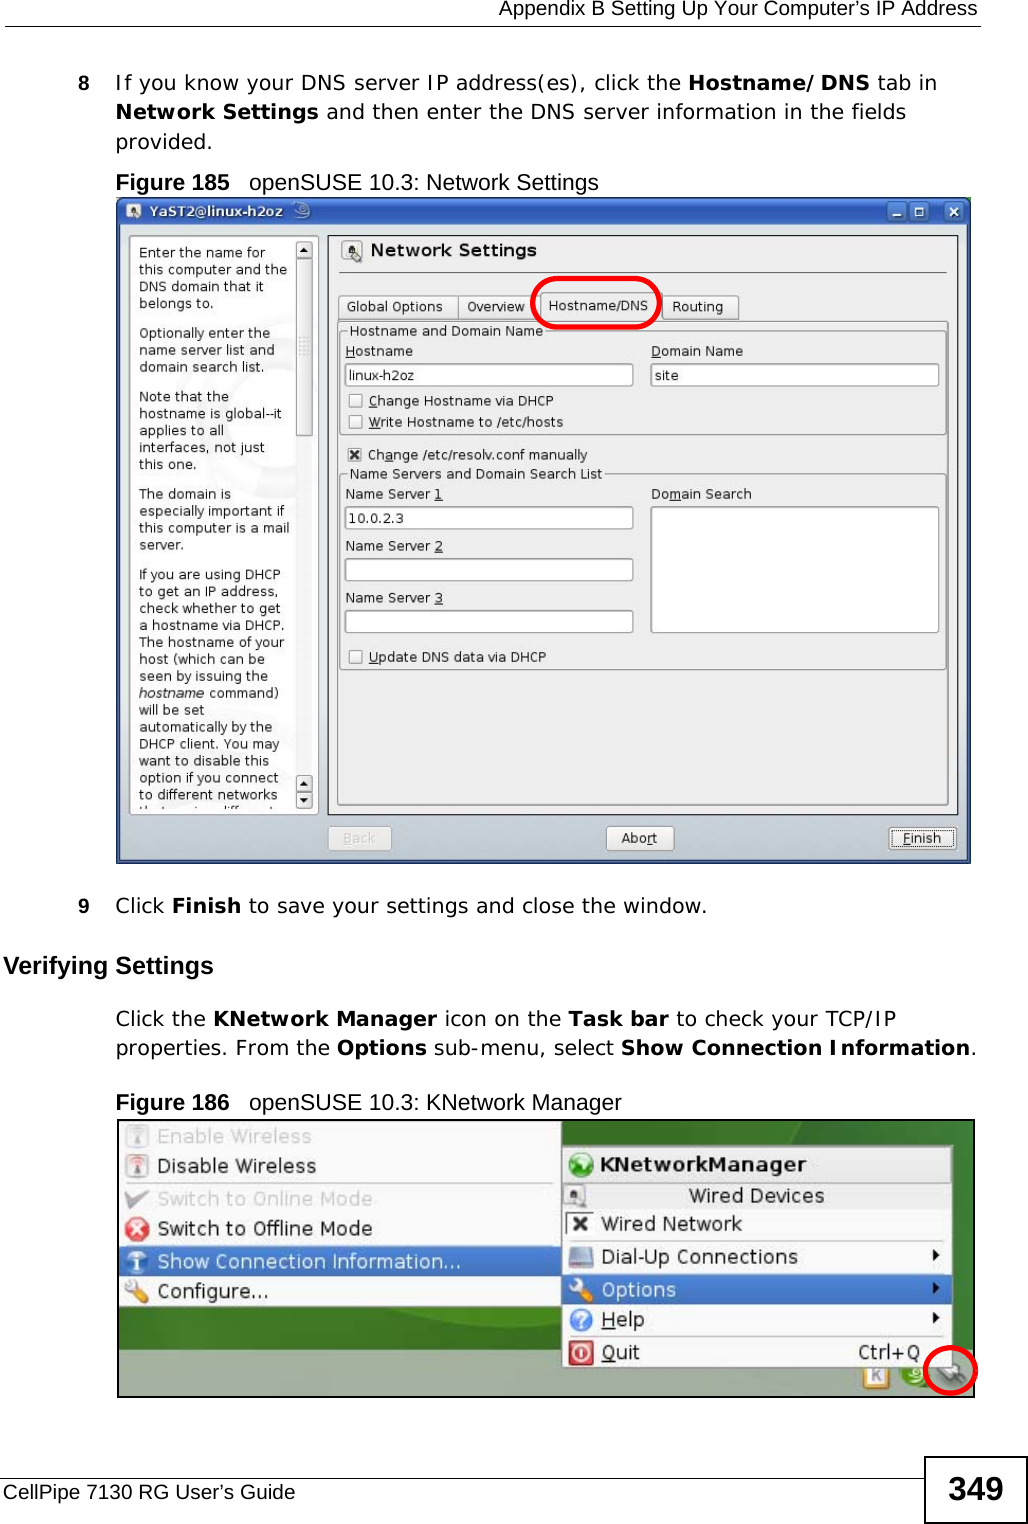  Appendix B Setting Up Your Computer’s IP AddressCellPipe 7130 RG User’s Guide 3498If you know your DNS server IP address(es), click the Hostname/DNS tab in Network Settings and then enter the DNS server information in the fields provided.Figure 185   openSUSE 10.3: Network Settings9Click Finish to save your settings and close the window.Verifying SettingsClick the KNetwork Manager icon on the Task bar to check your TCP/IP properties. From the Options sub-menu, select Show Connection Information.Figure 186   openSUSE 10.3: KNetwork Manager